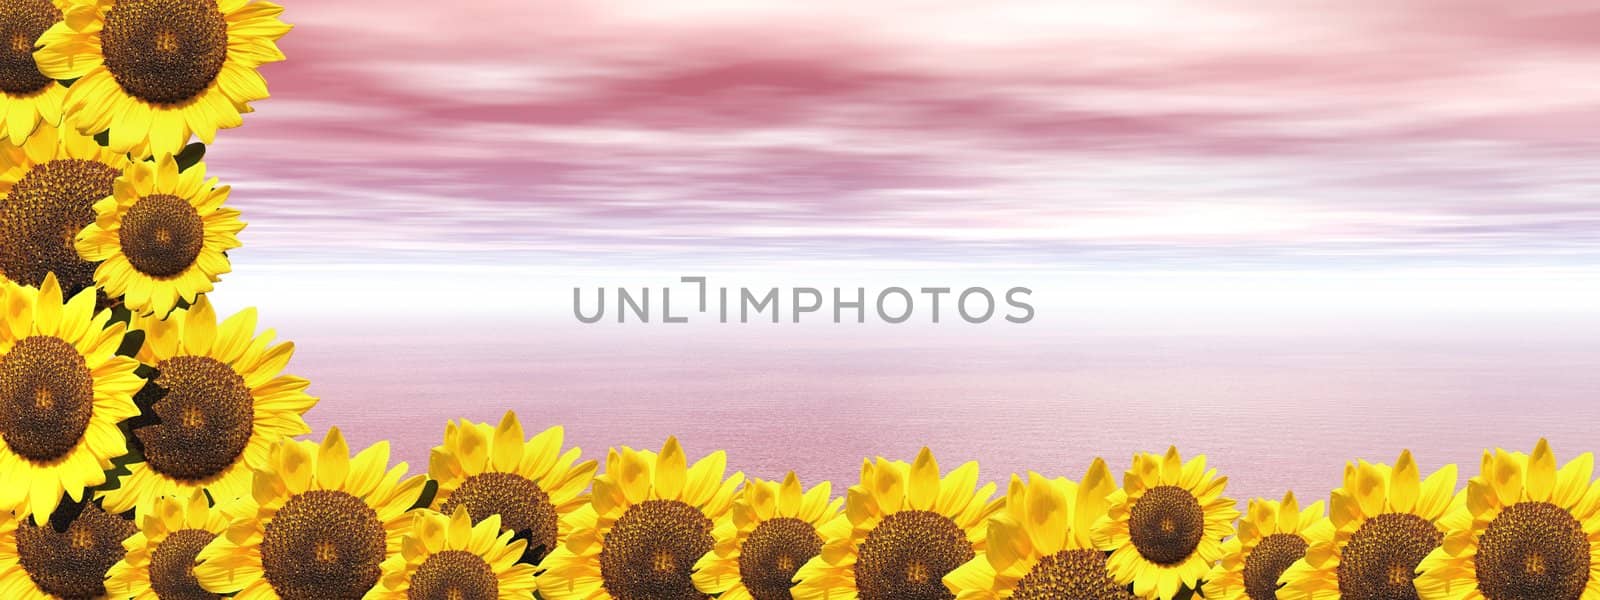 Background of pink sky and ocean with lots of sunflowers on down and on the left side